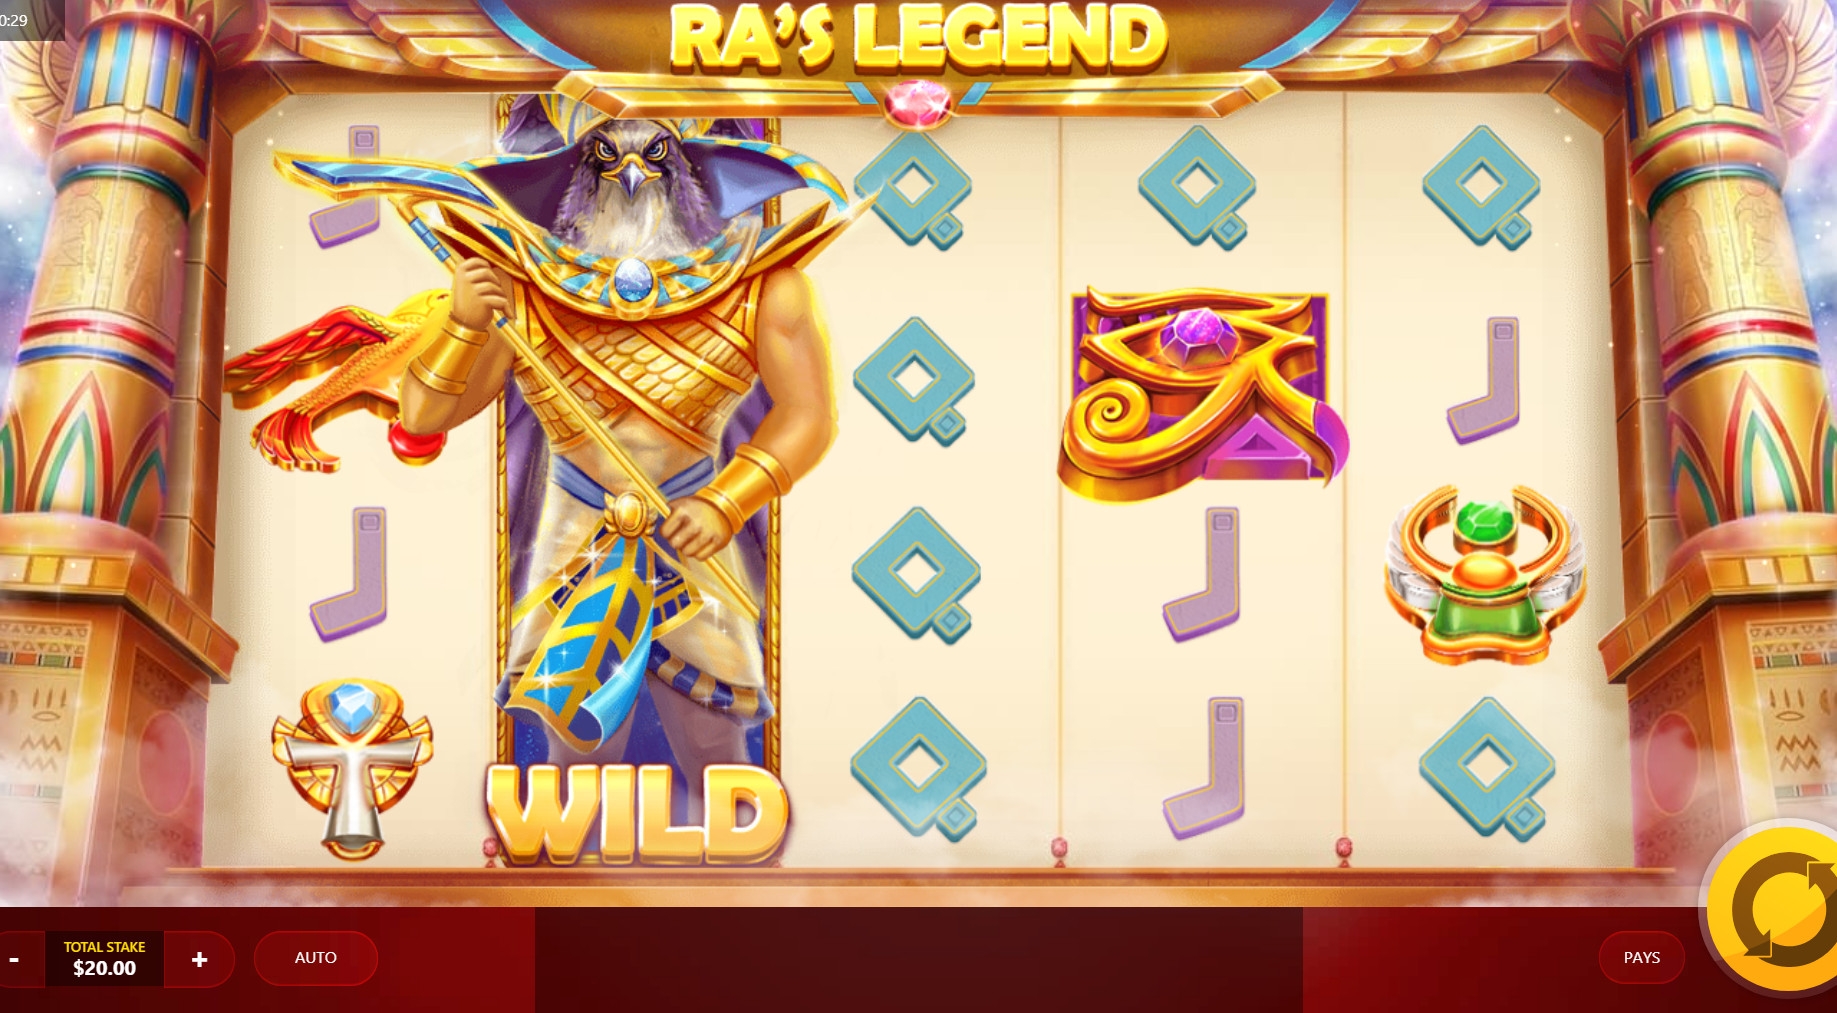 Ra’s Legend (Ra’s Legend) from category Slots